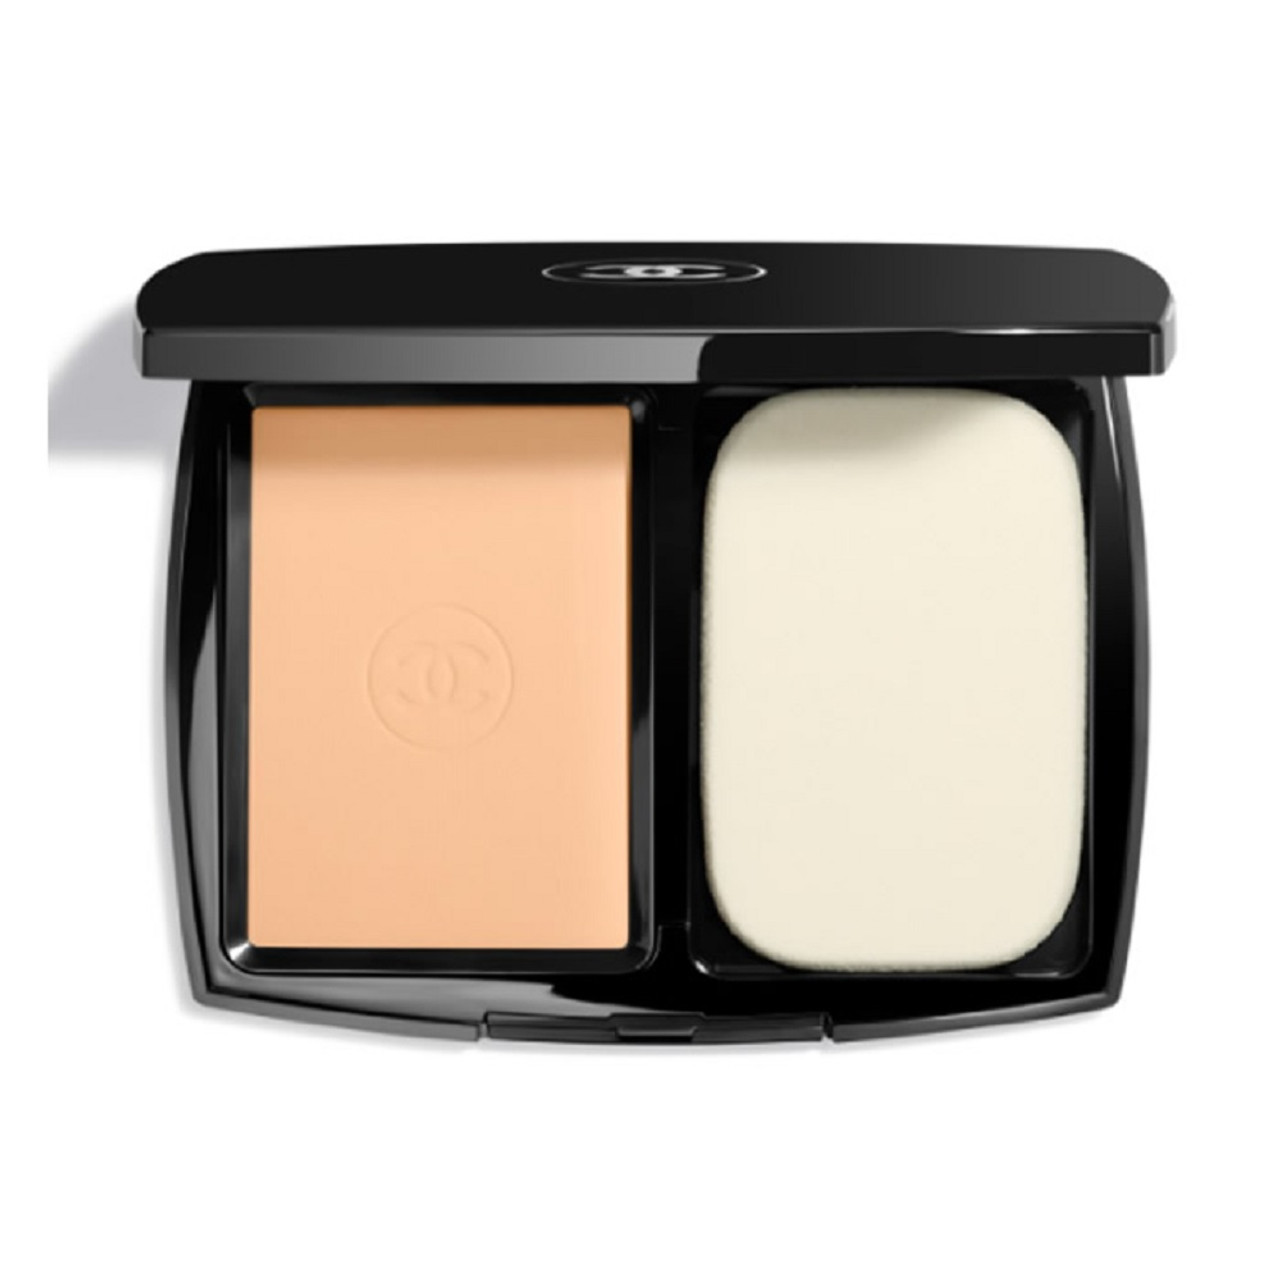 CHANEL Ultrawear – All – Day Comfort Flawless Finish Compact